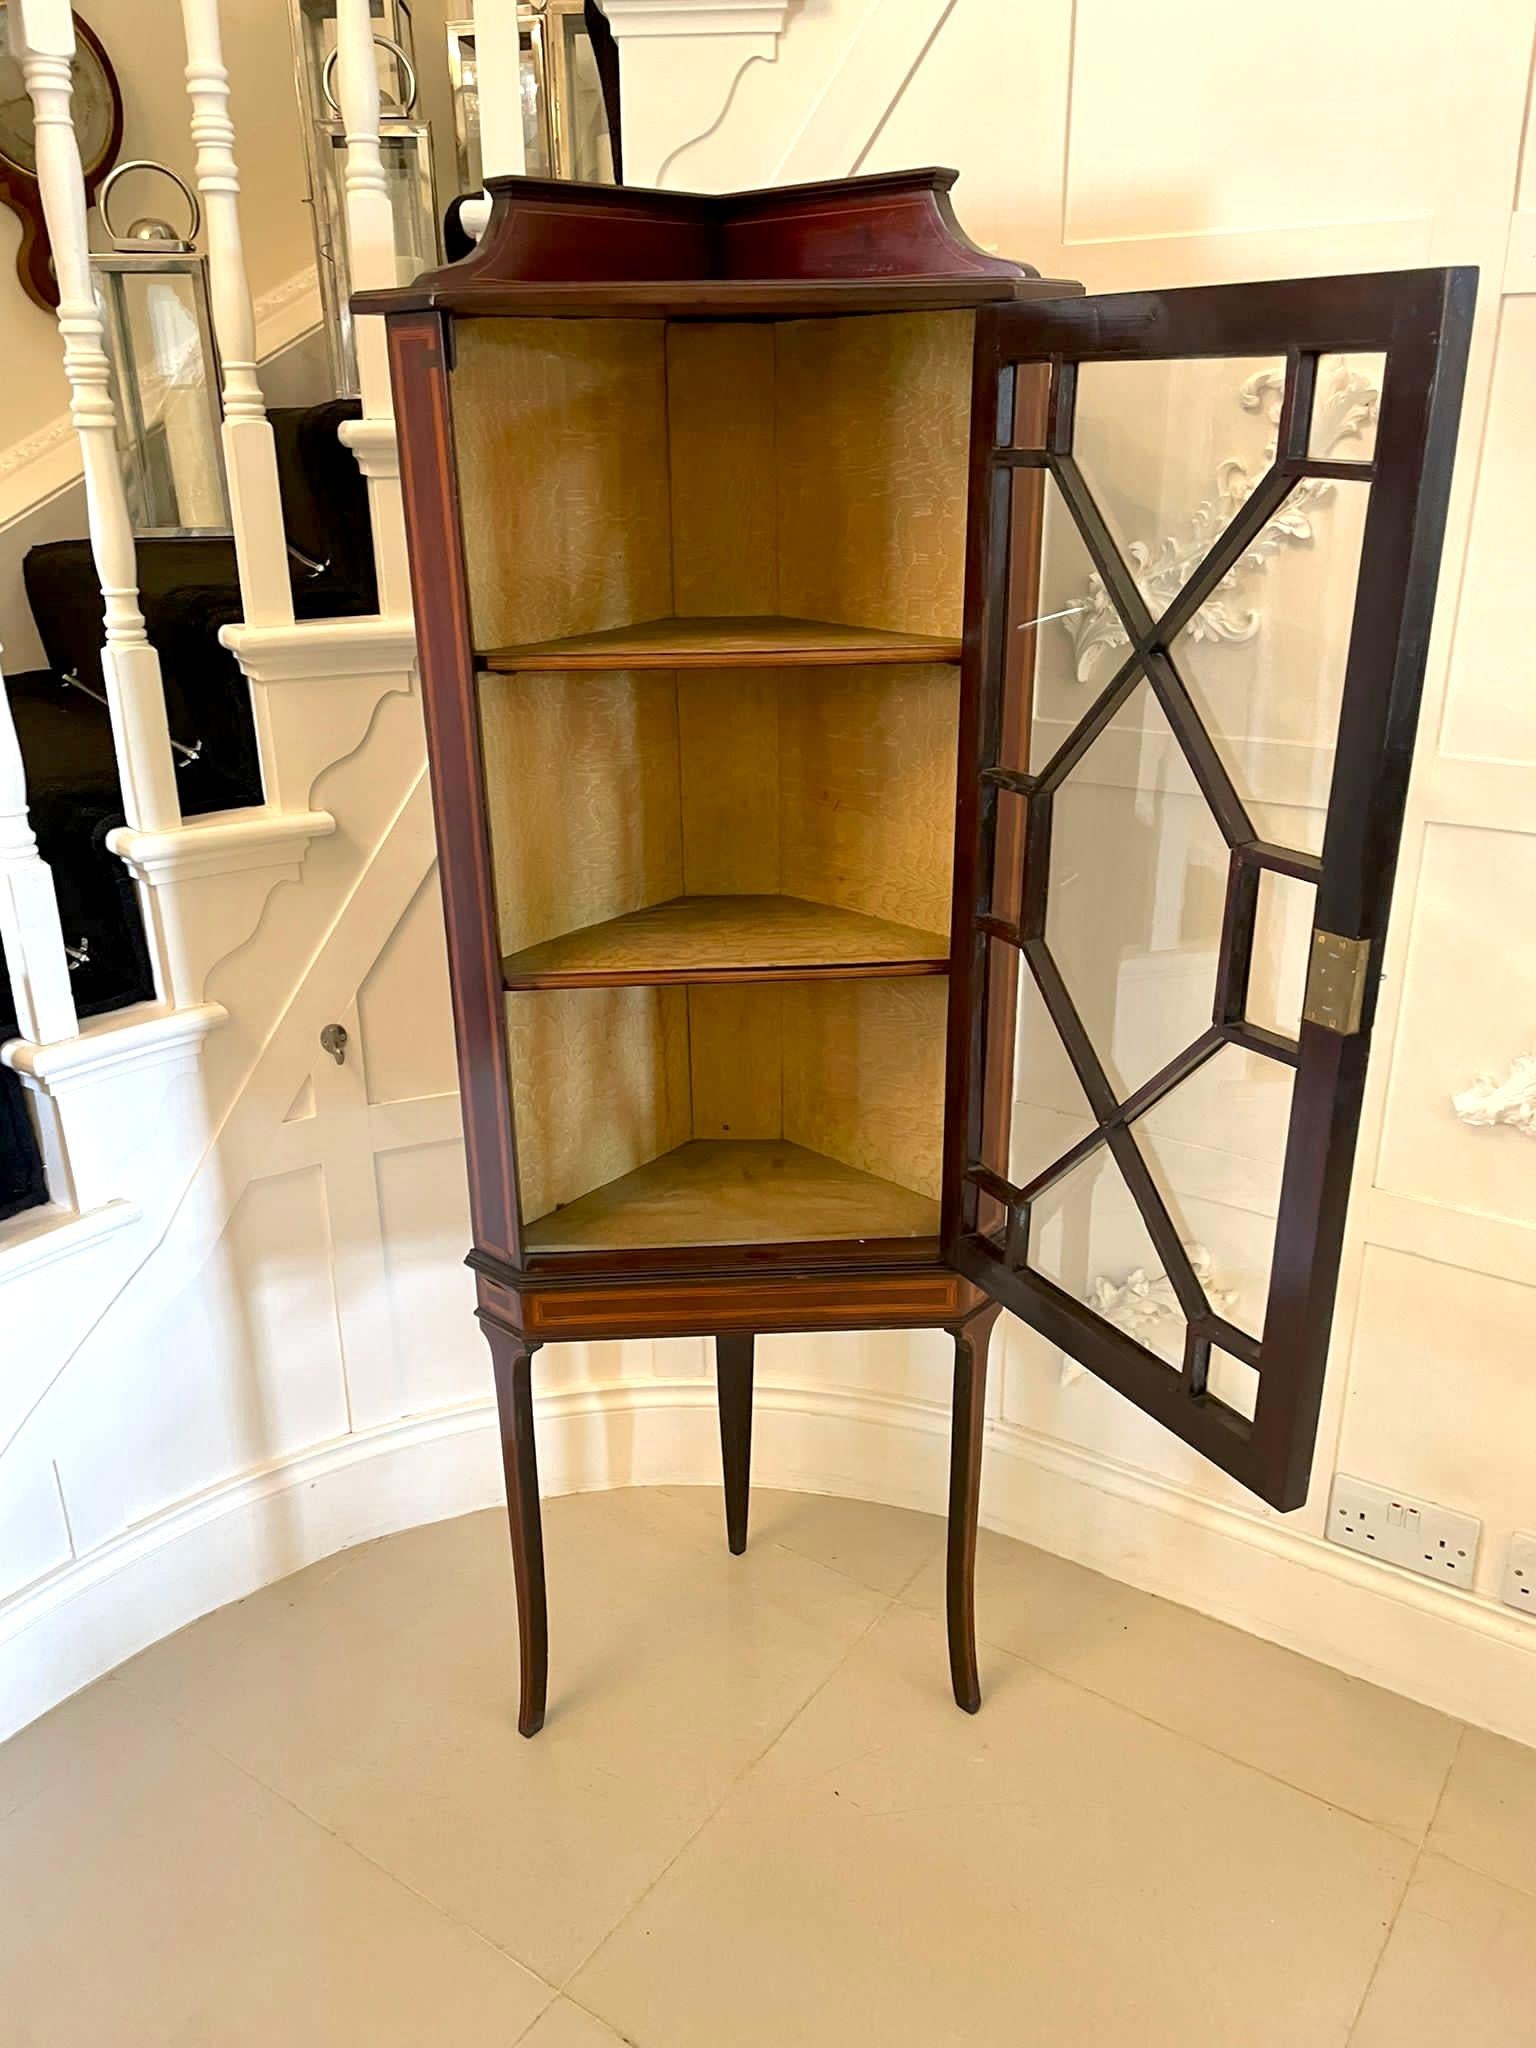 Quality antique Edwardian inlaid mahogany corner display cabinet having an attractive mahogany inlaid gallery and top above a single astral glazed door opening to reveal two shelves standing on elegant mahogany inlaid shaped legs.

A charming